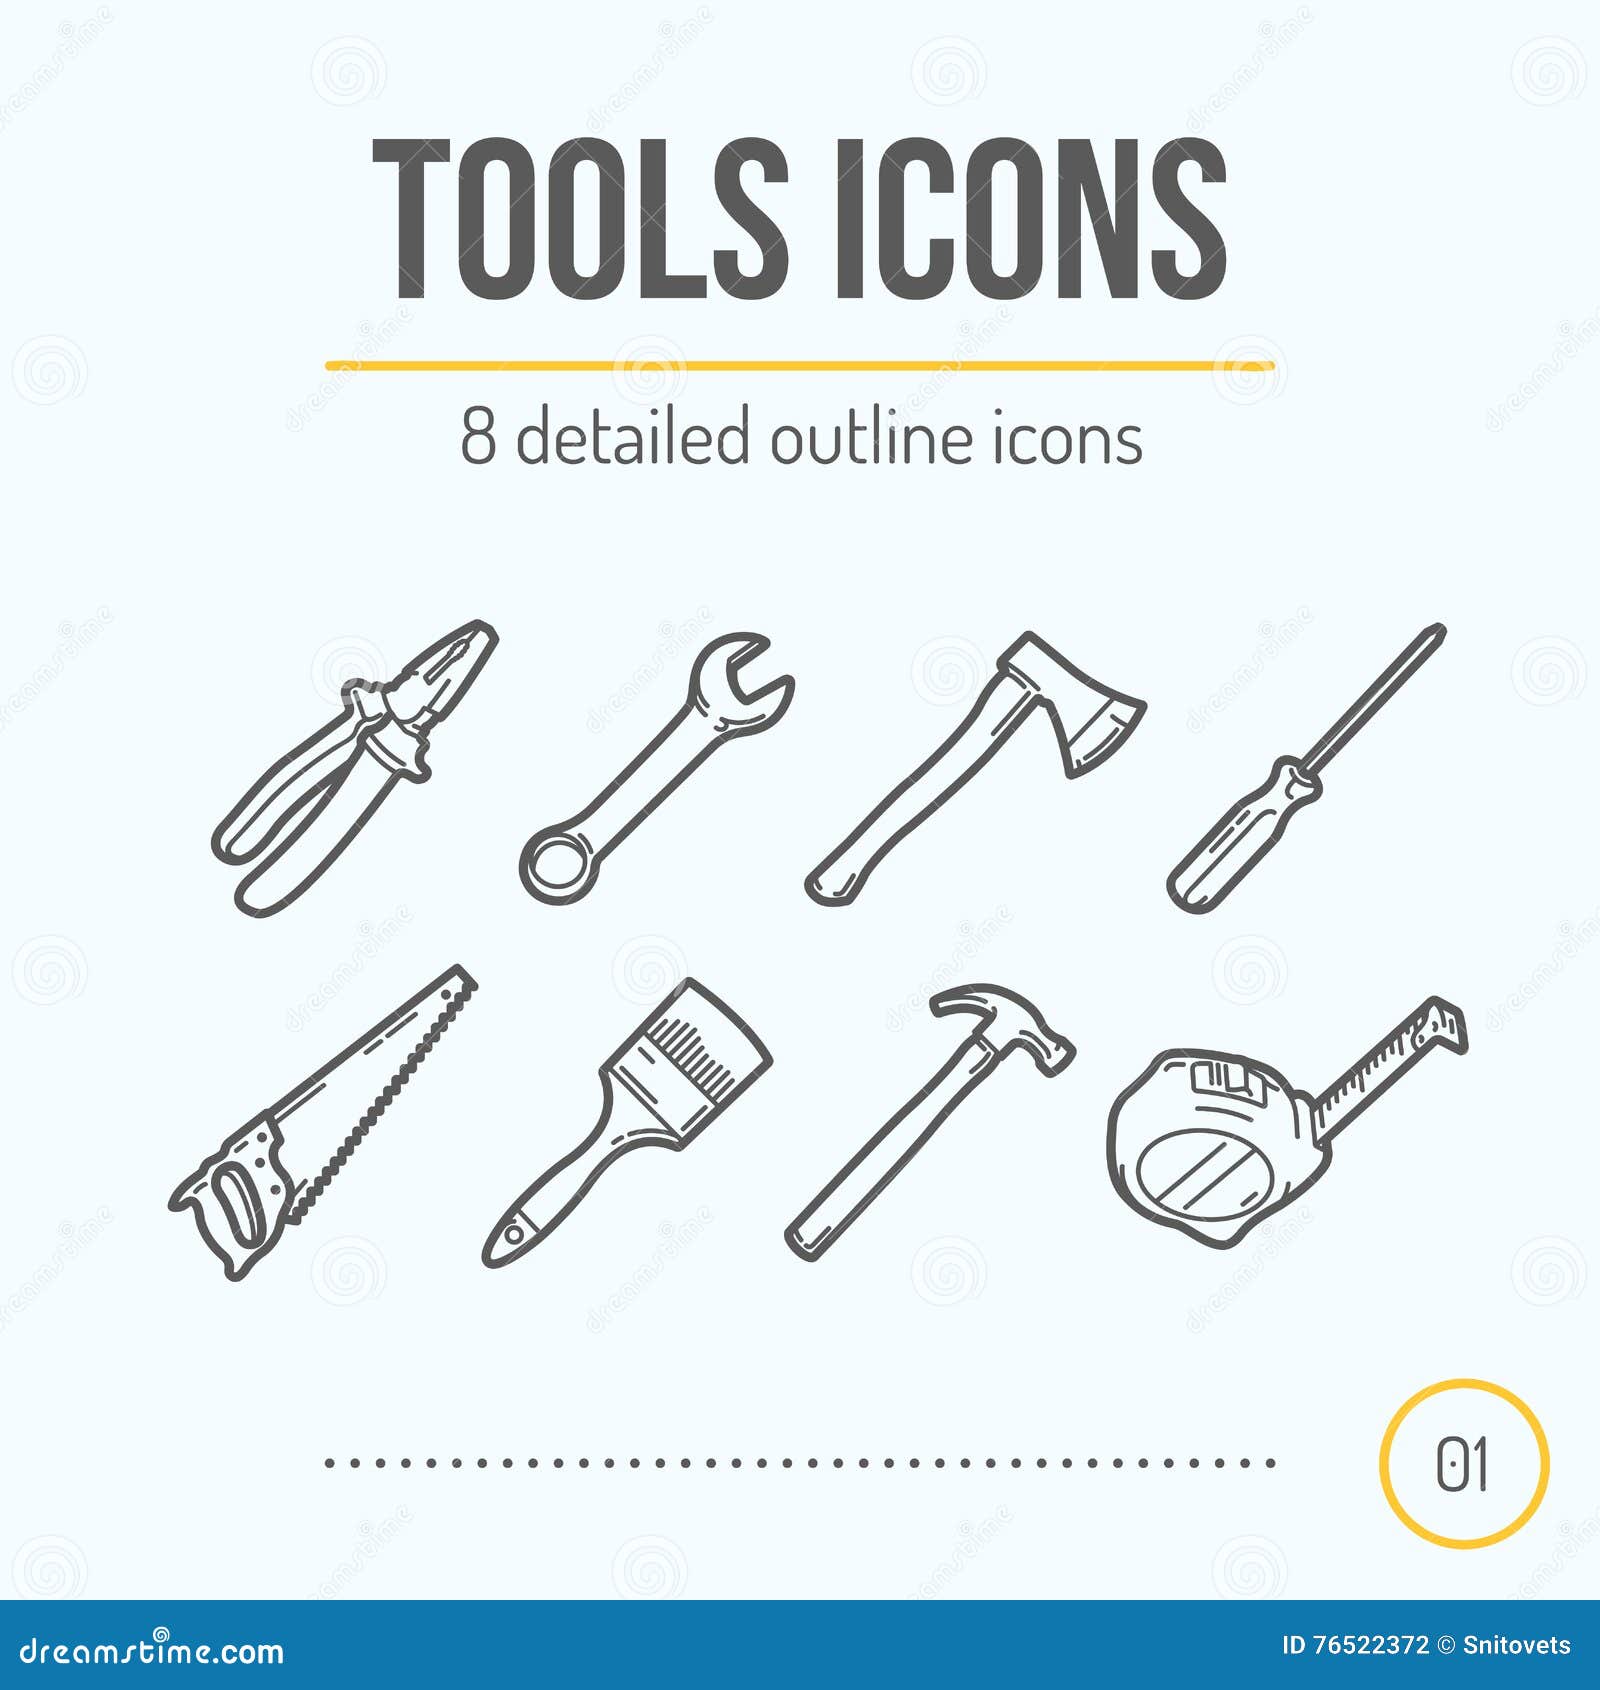 tools icons set (pliers, wrench, axe, screwdriver, saw, brush, hammer, tape measure)